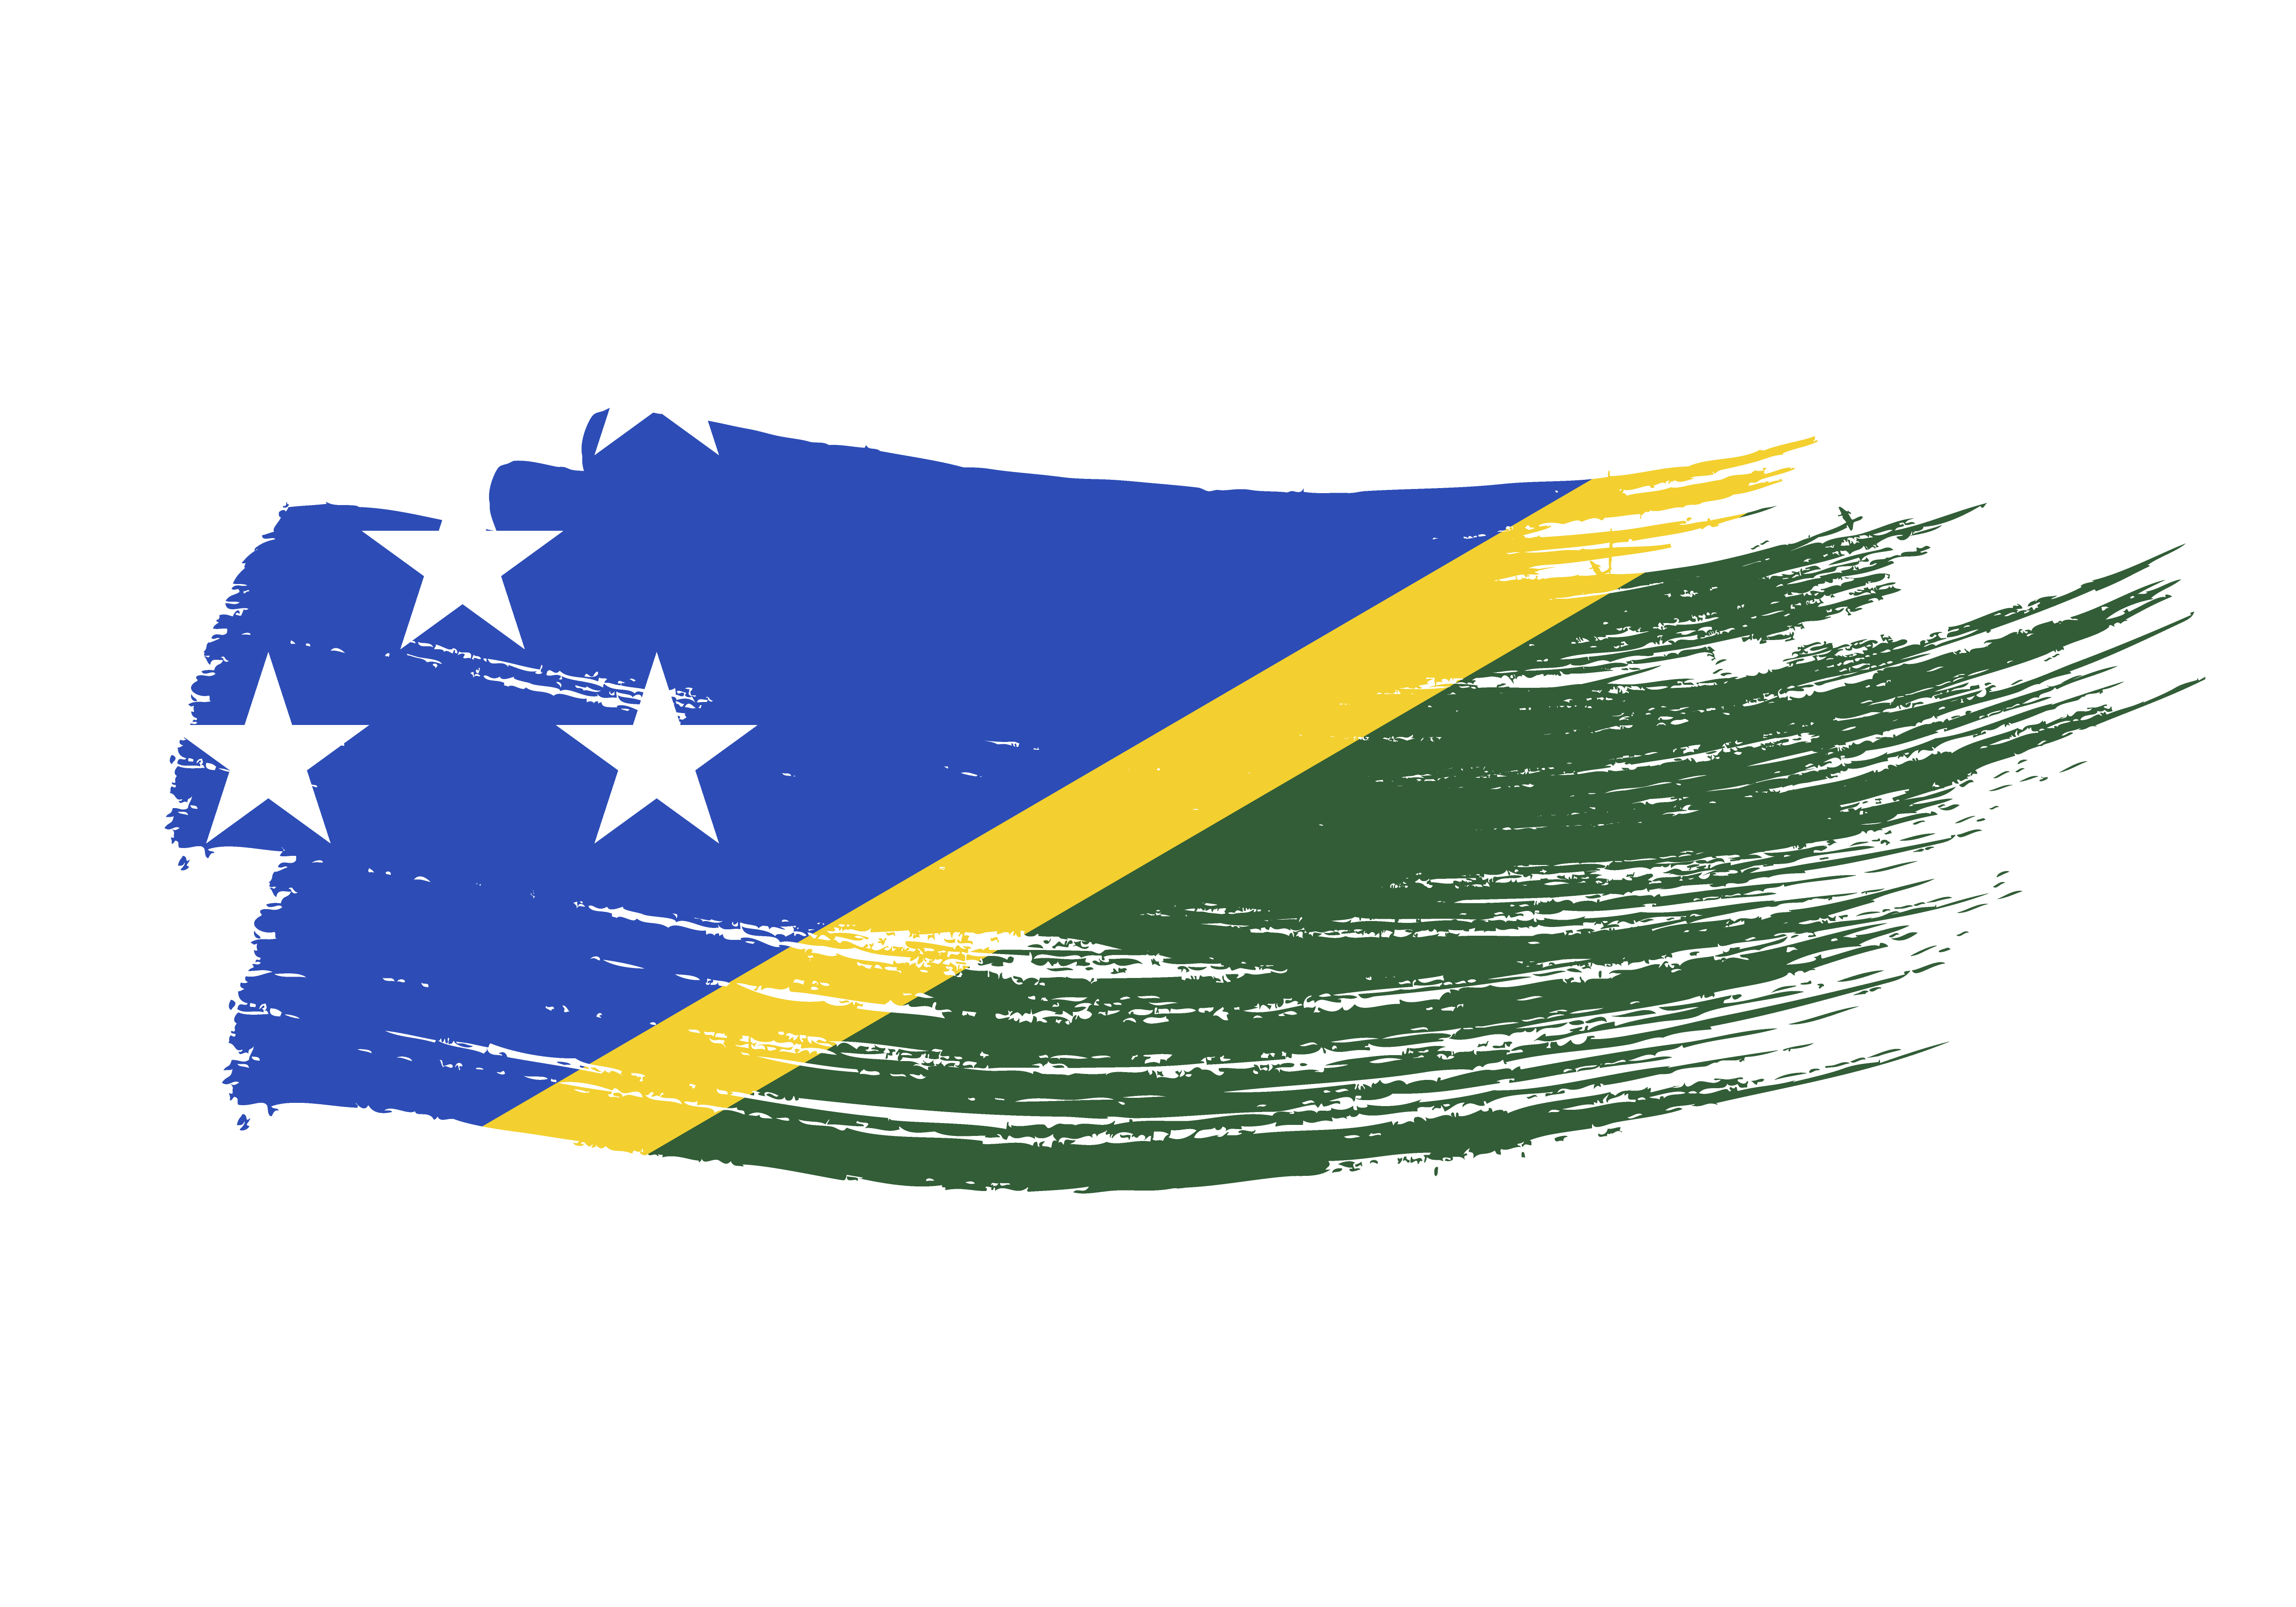 Solomon Islands: A Federation that Never Was